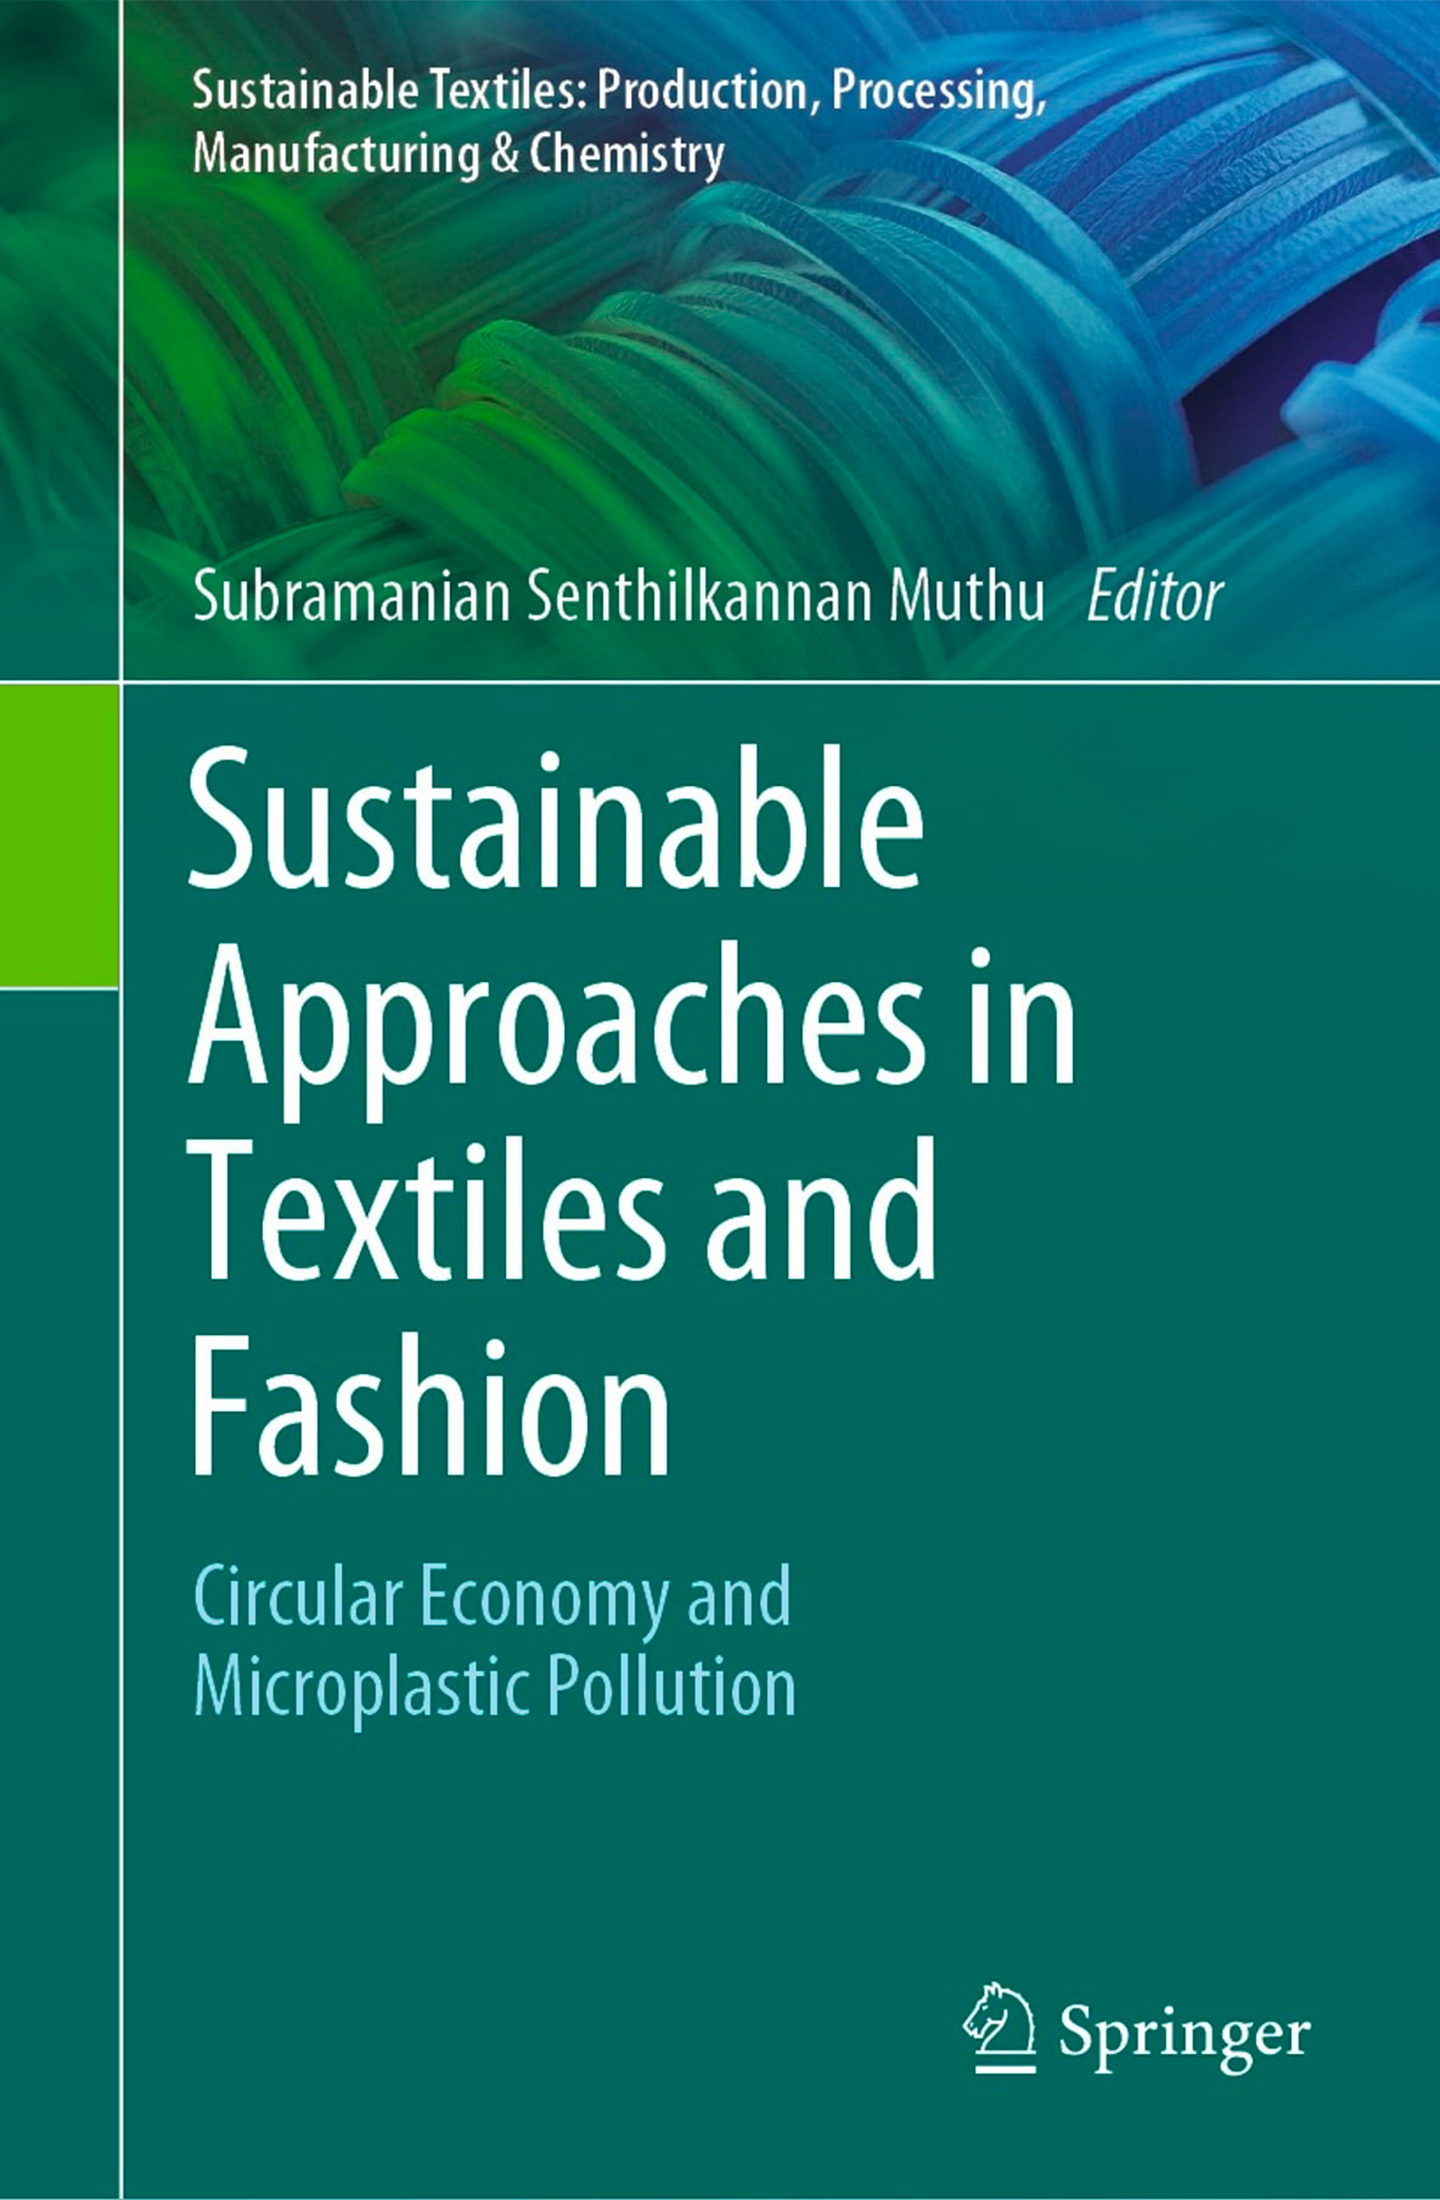 Muthu, SS (ed.) (2022) Sustainable Approaches in Textiles and Fashion: Circular Economy and Microplastic Pollution, Springer, Singapore